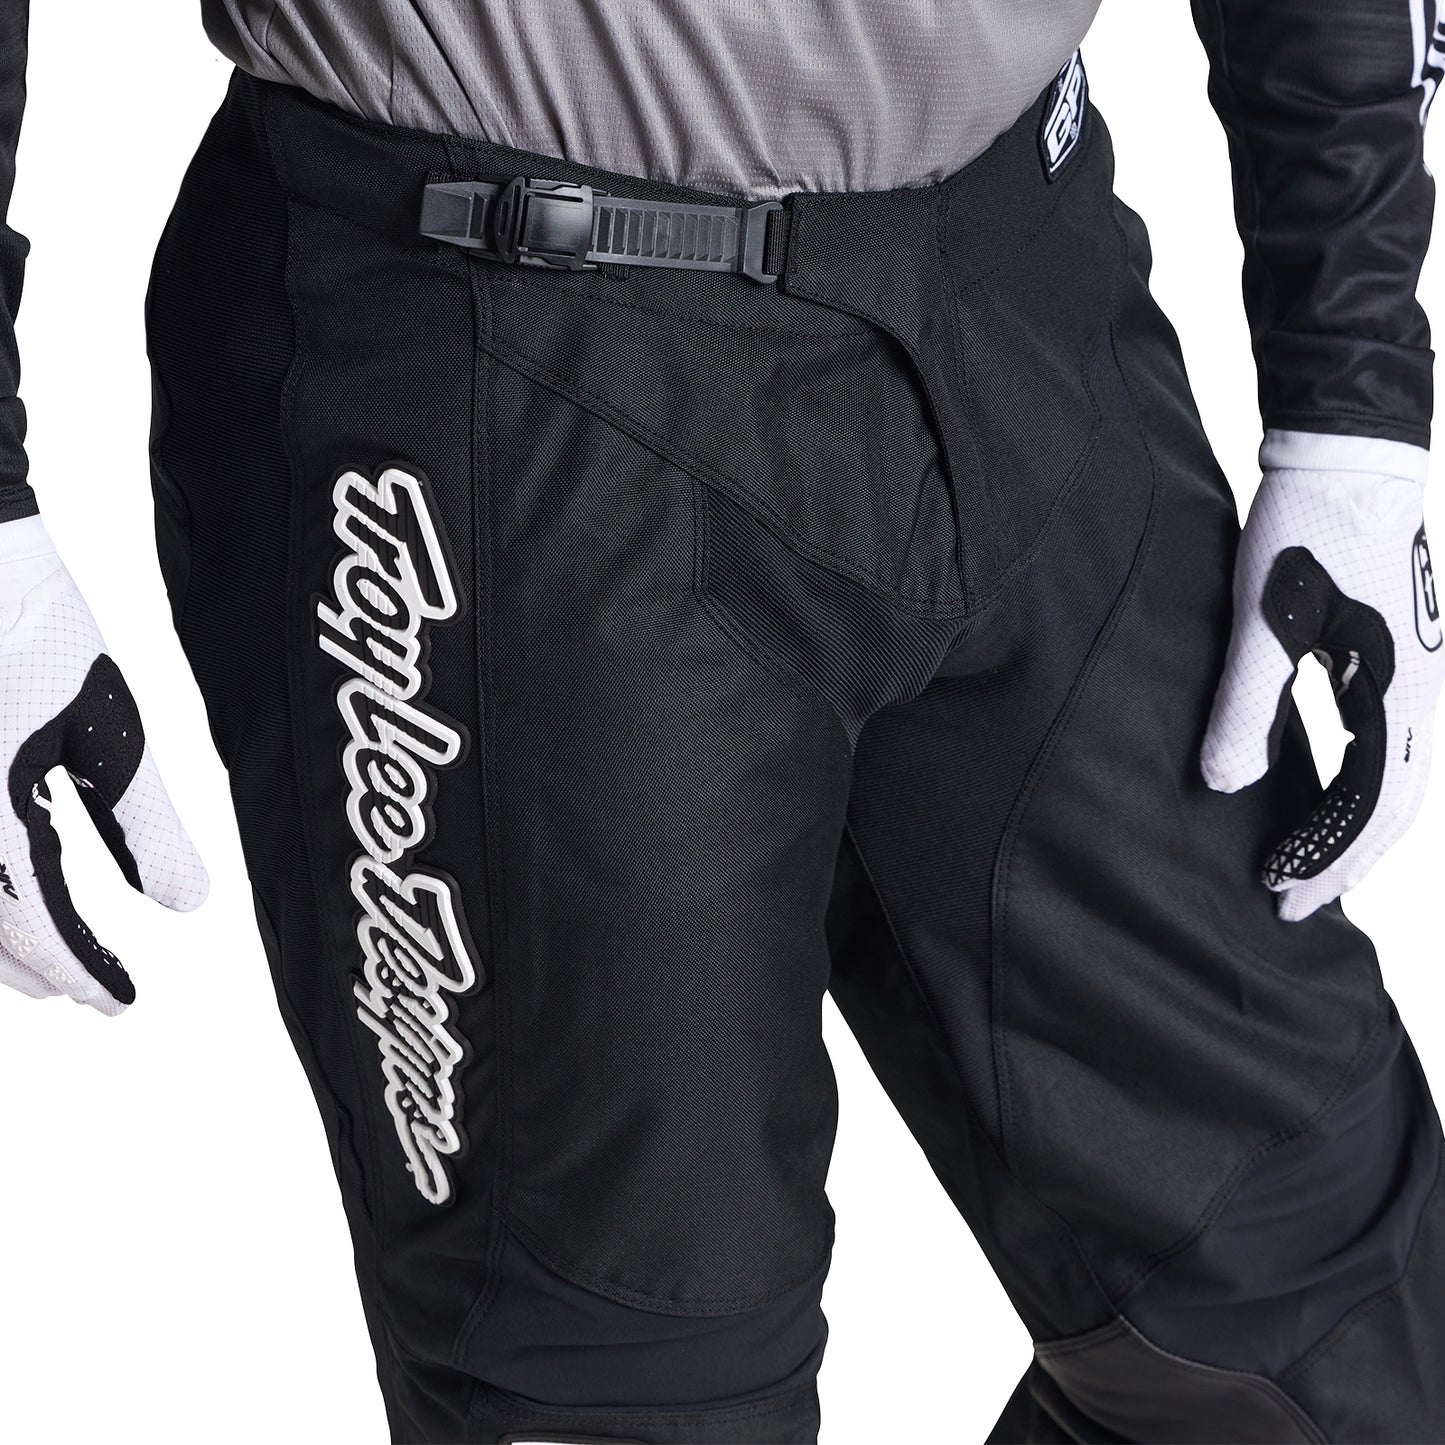 Motorbike pants TLD GP BRAZEN with comfy fit and stretch fabric for juniors